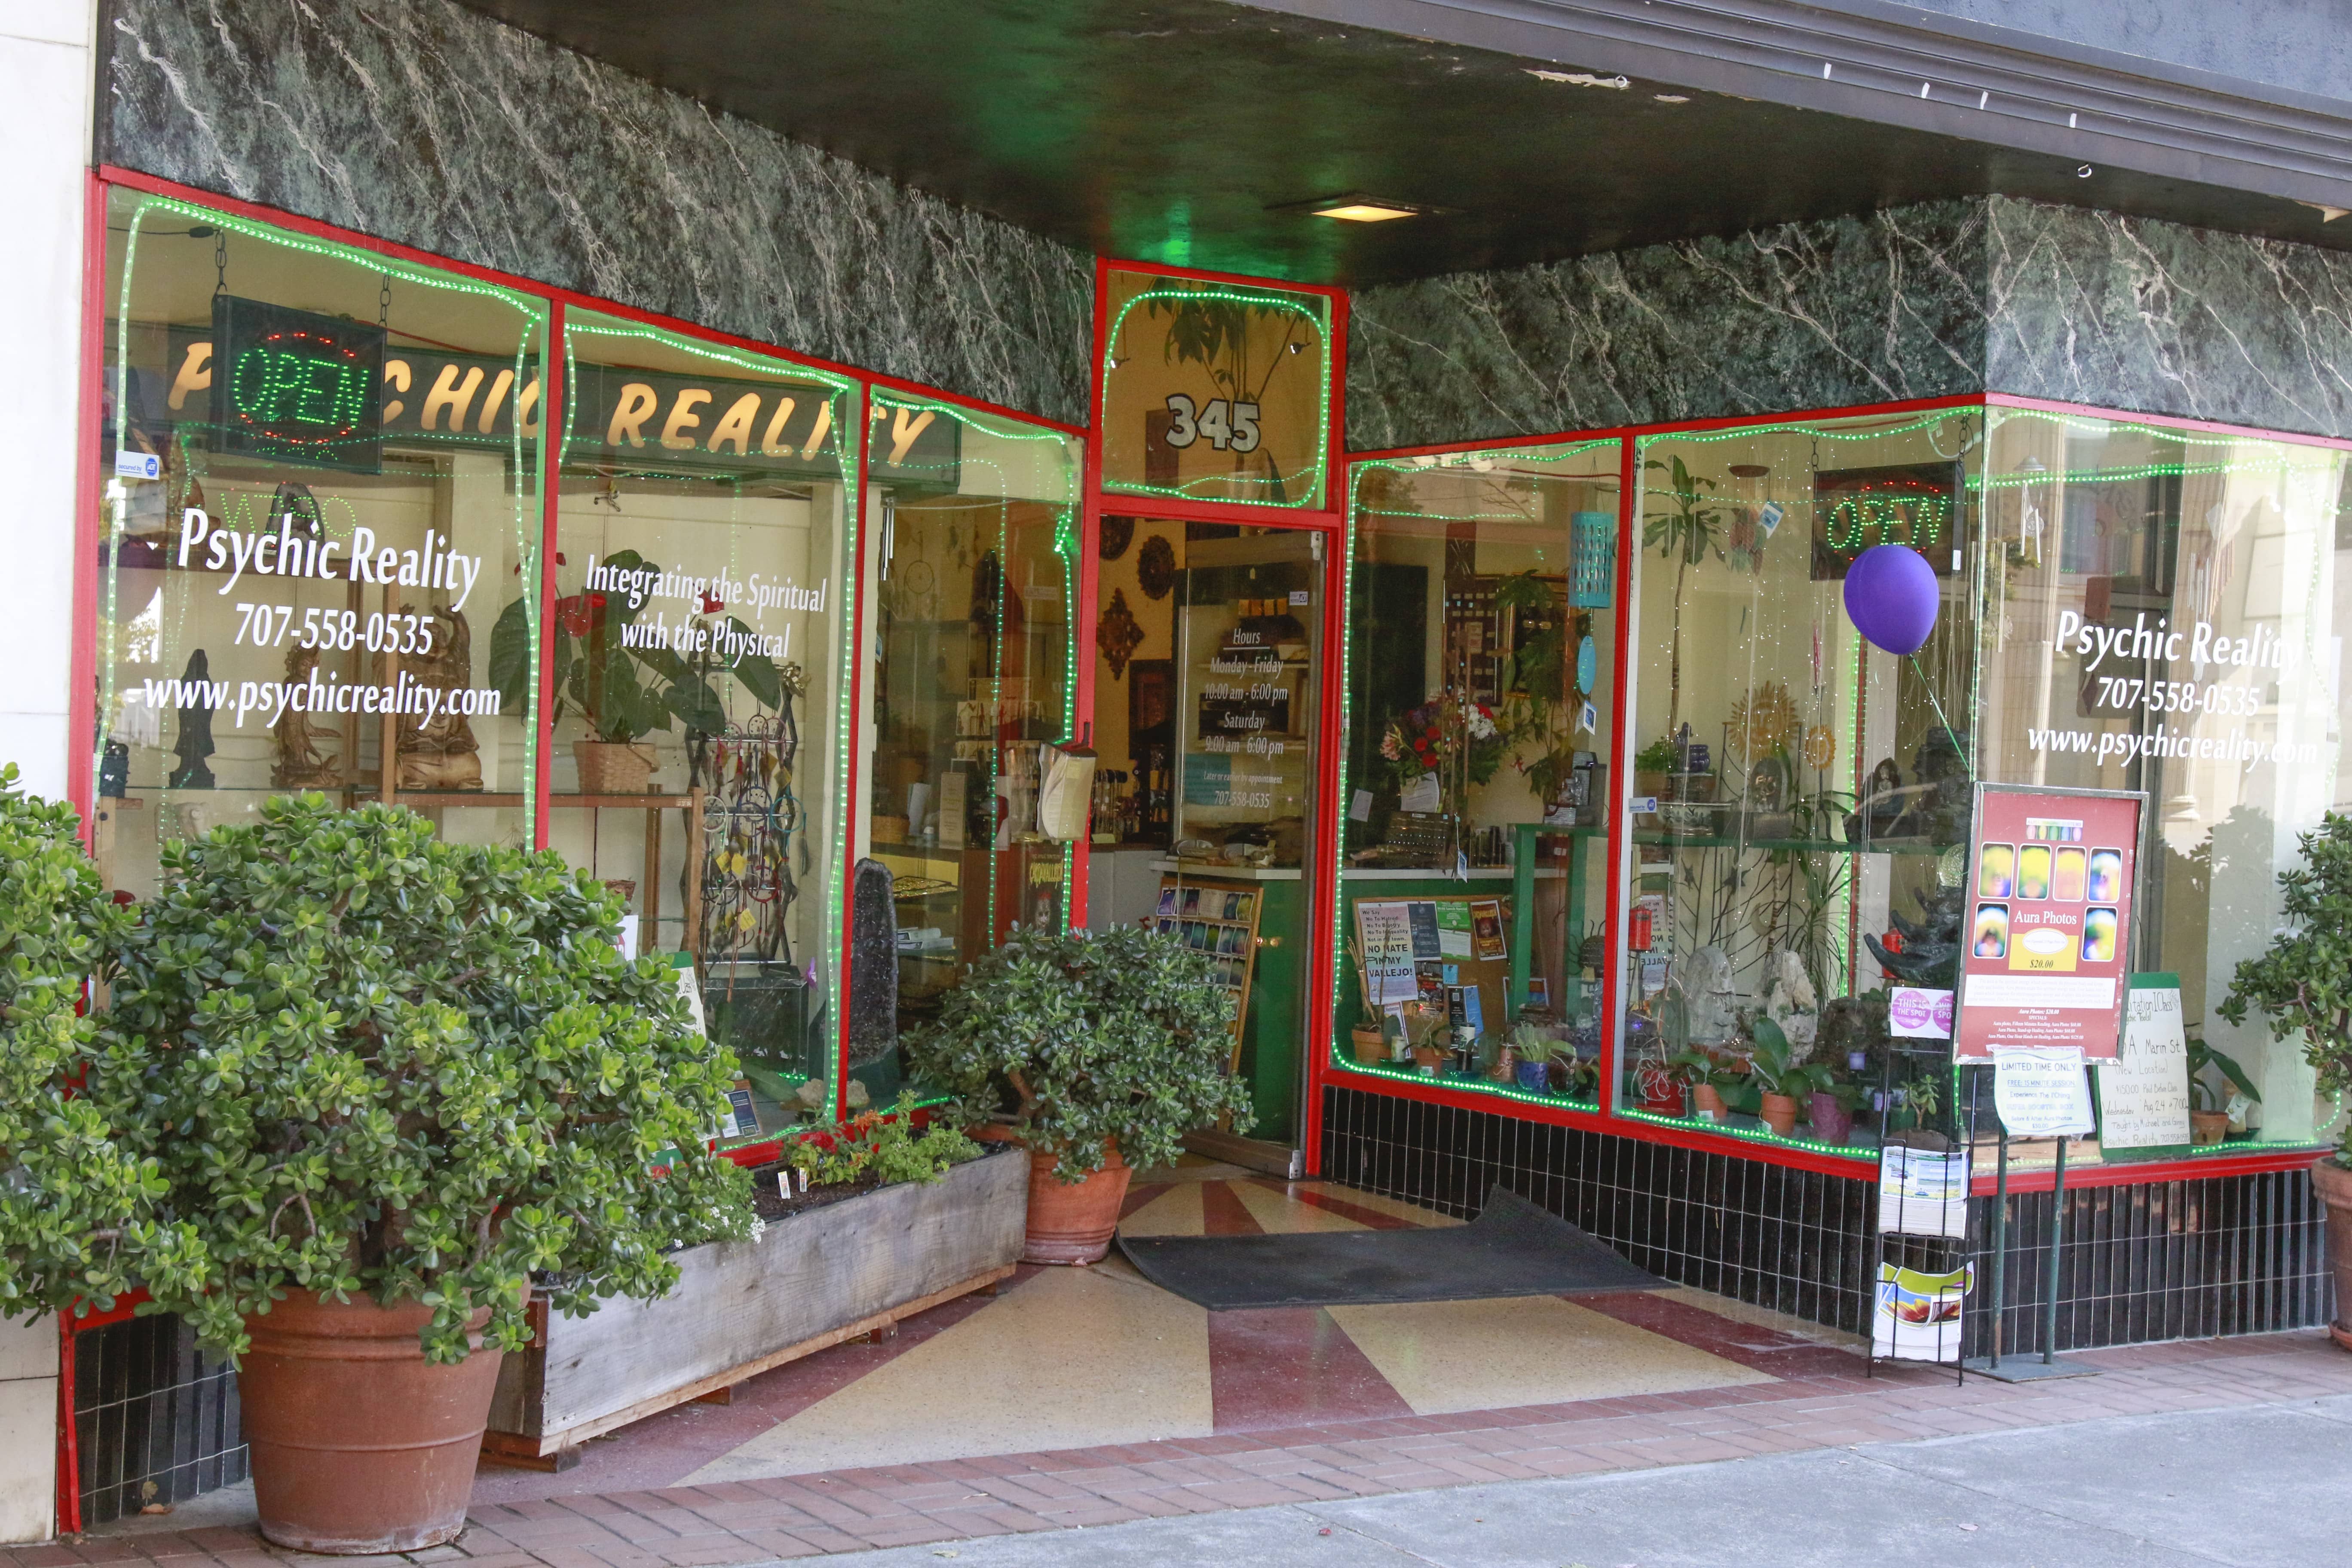 Store front of Psychic Reality, 345 Georgia St. Vallejo, CA 94590